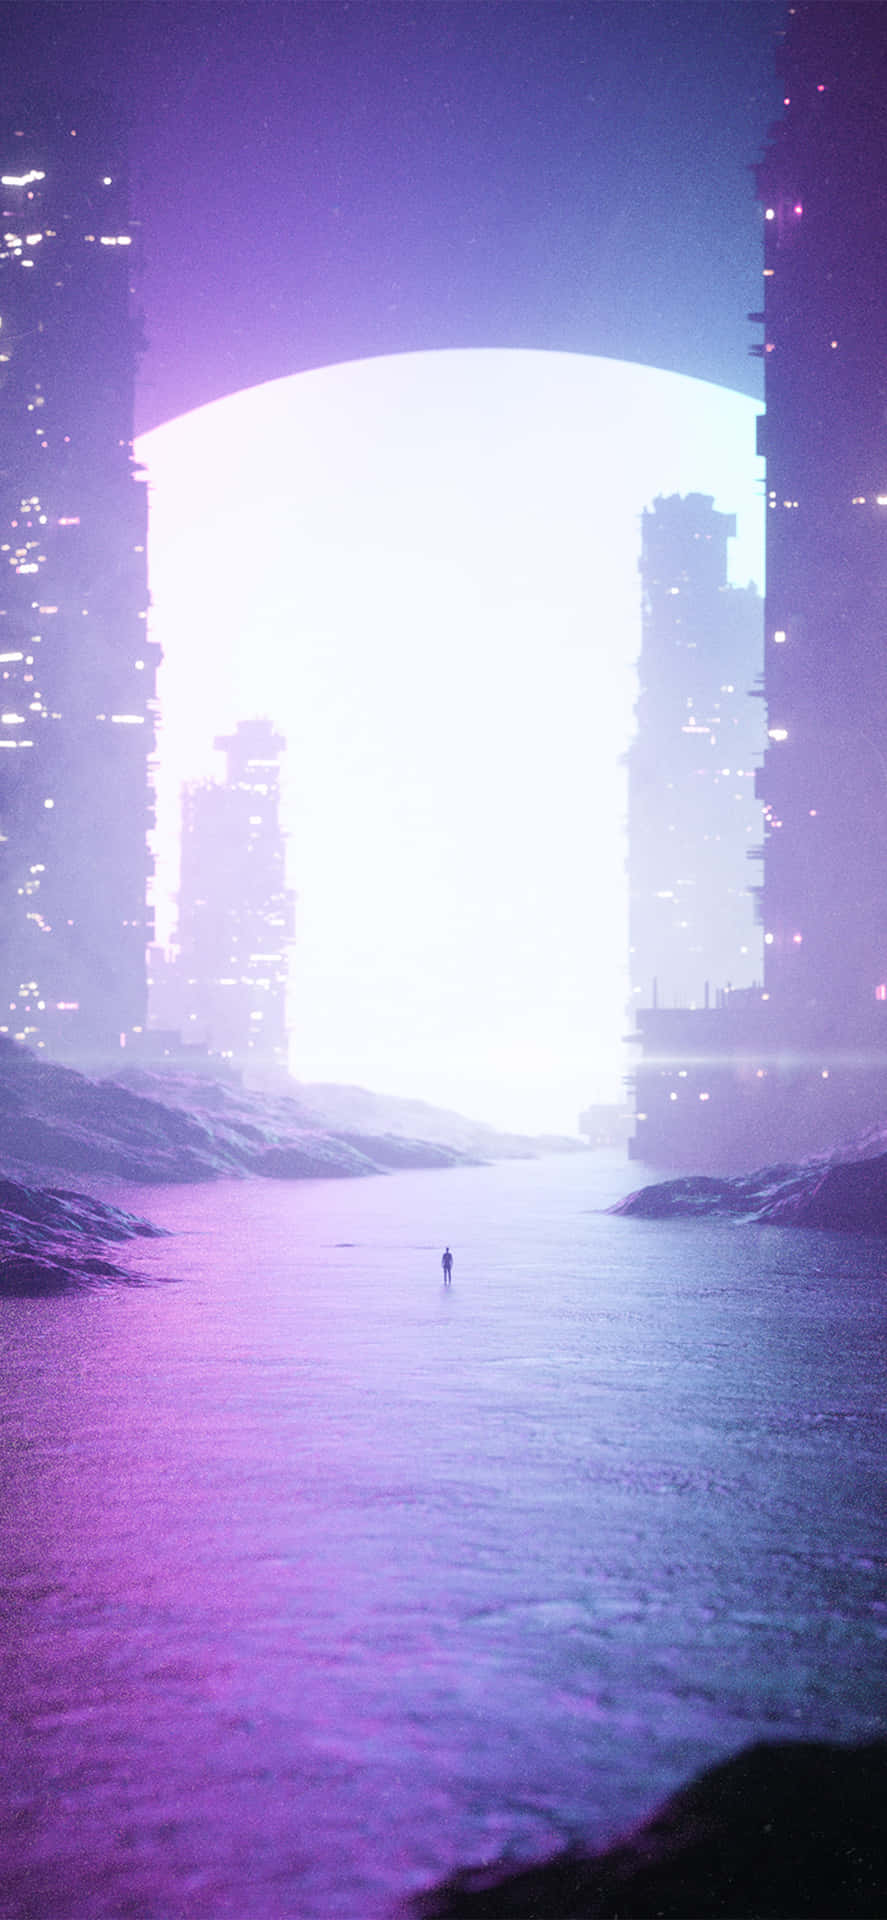 A City With A Purple Sky And A City In The Background Wallpaper